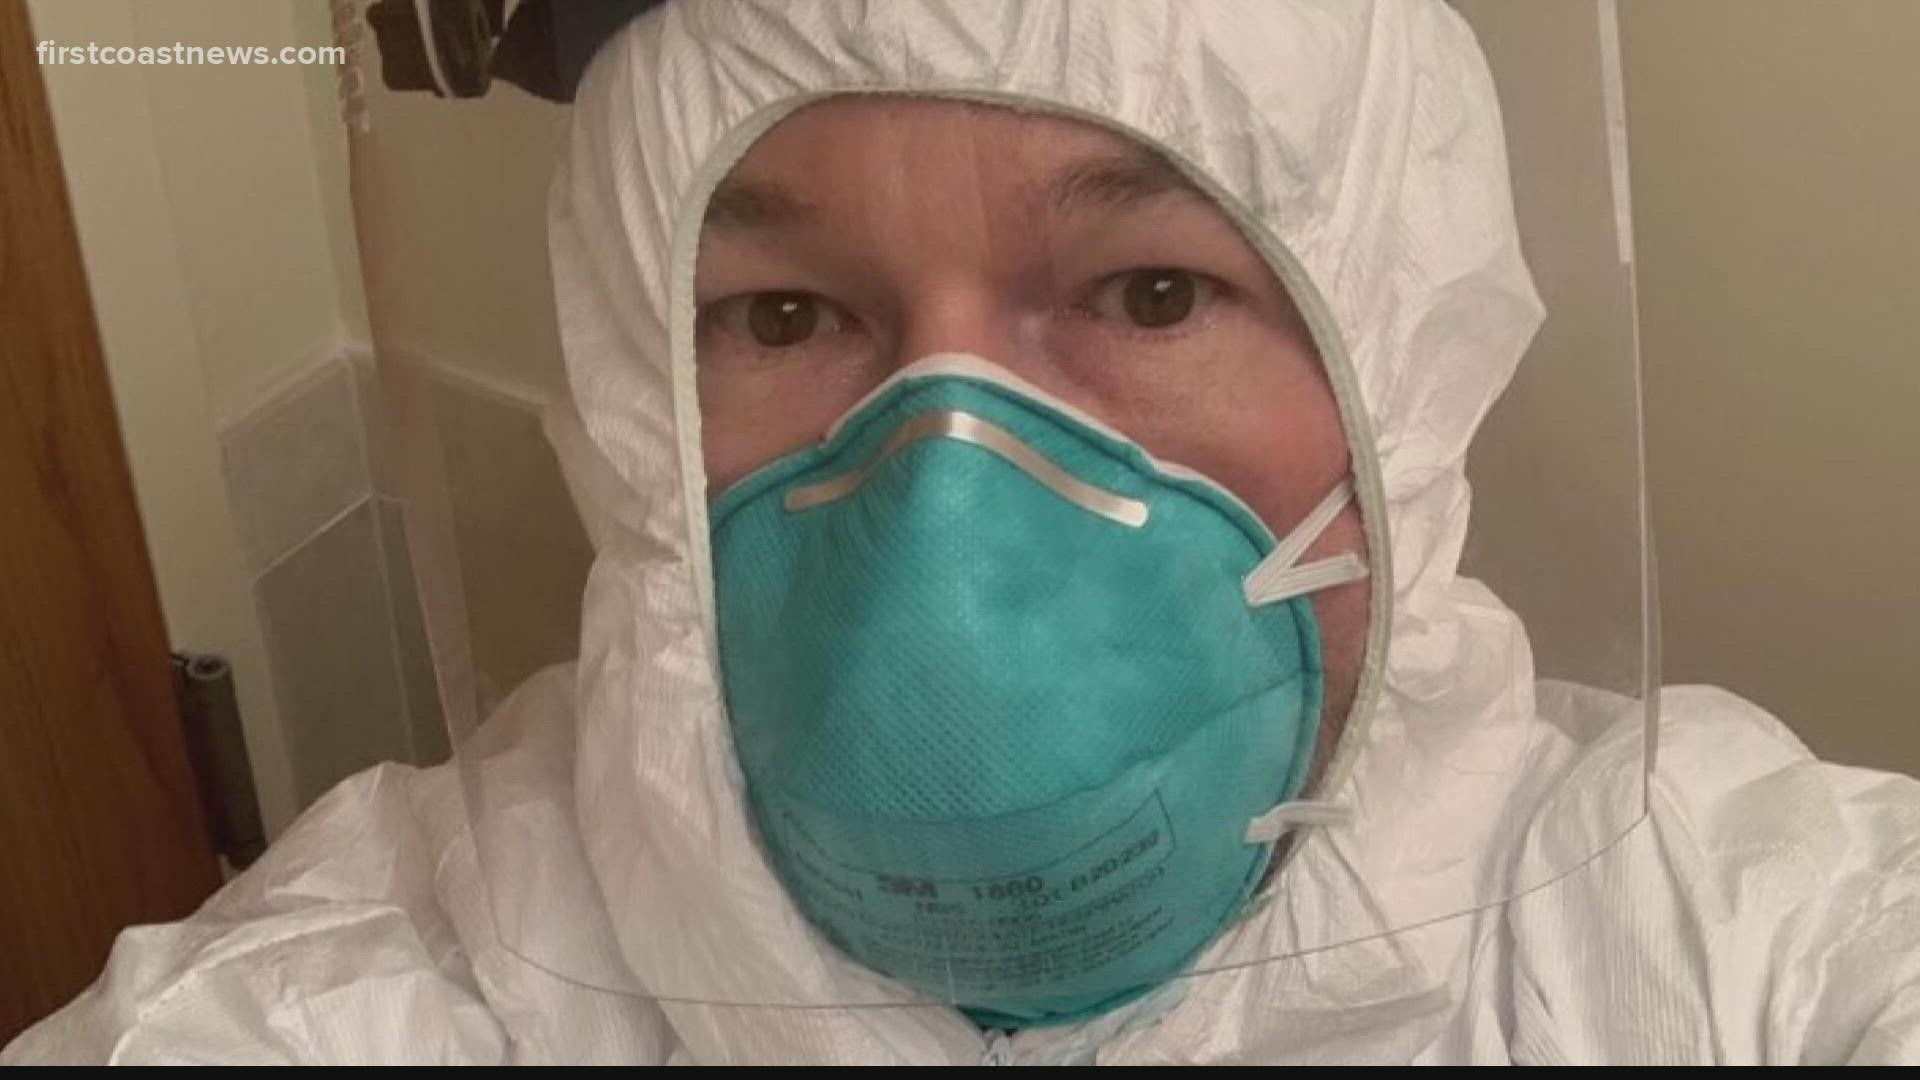 For Justin Adams, the COVID-19 pandemic is taking away his passion for his profession while also taking so many of his patients